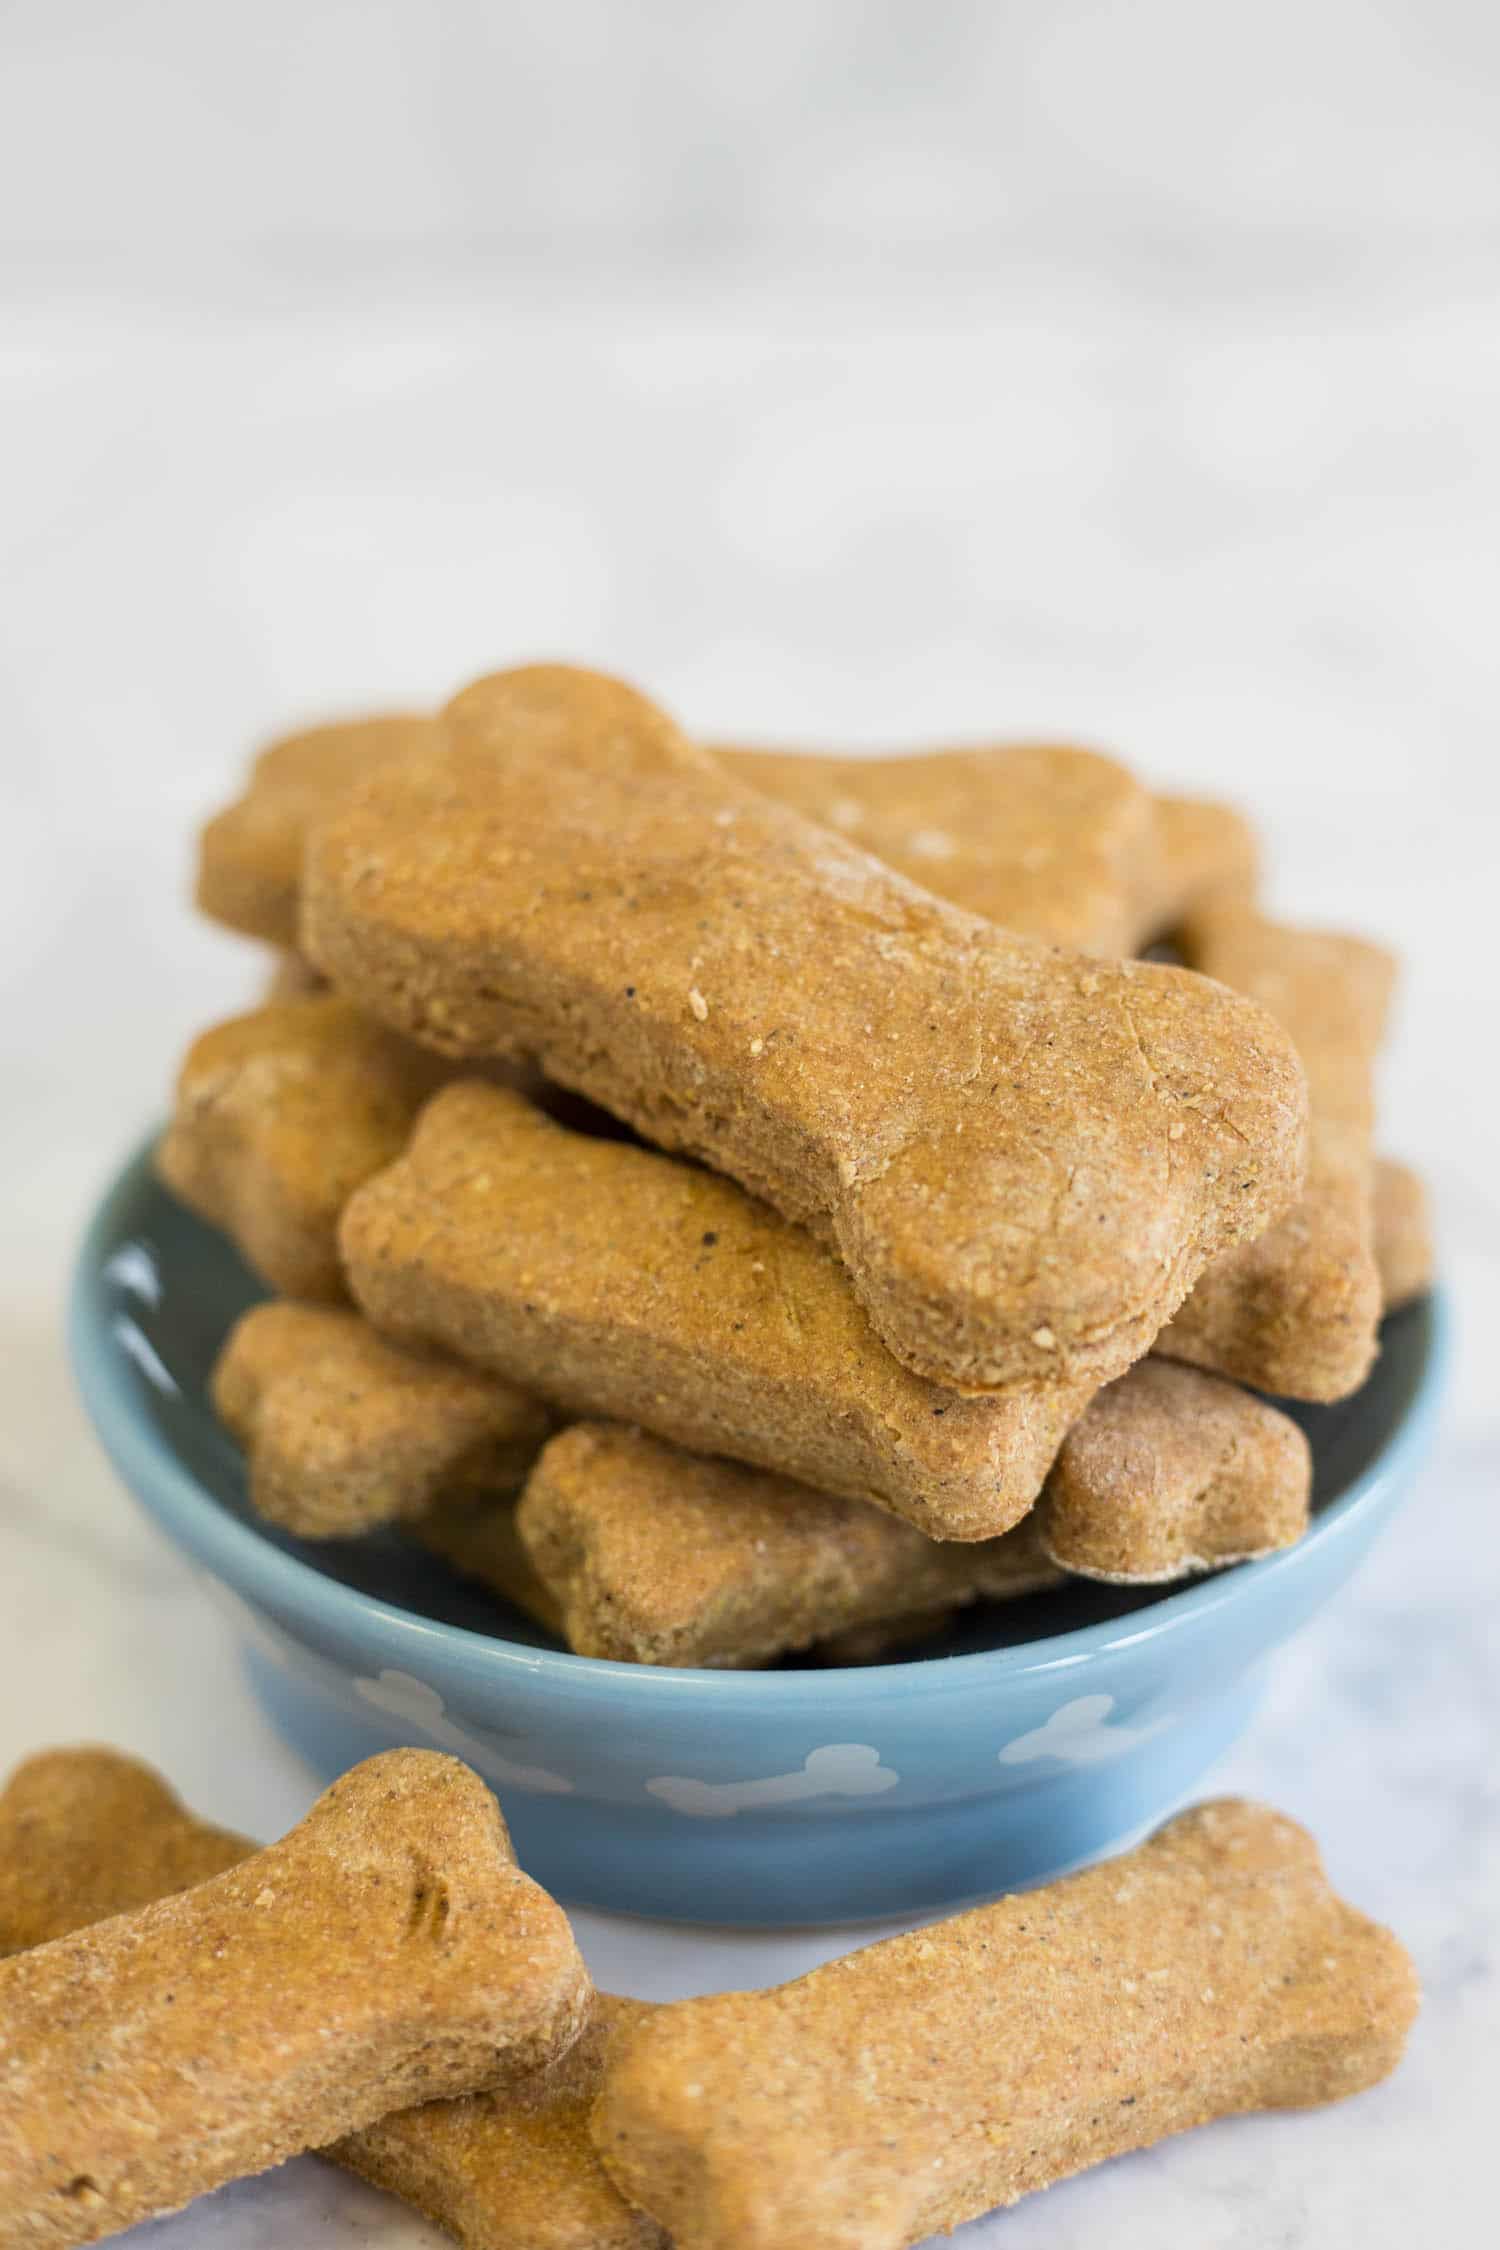 Bowl of dog biscuits